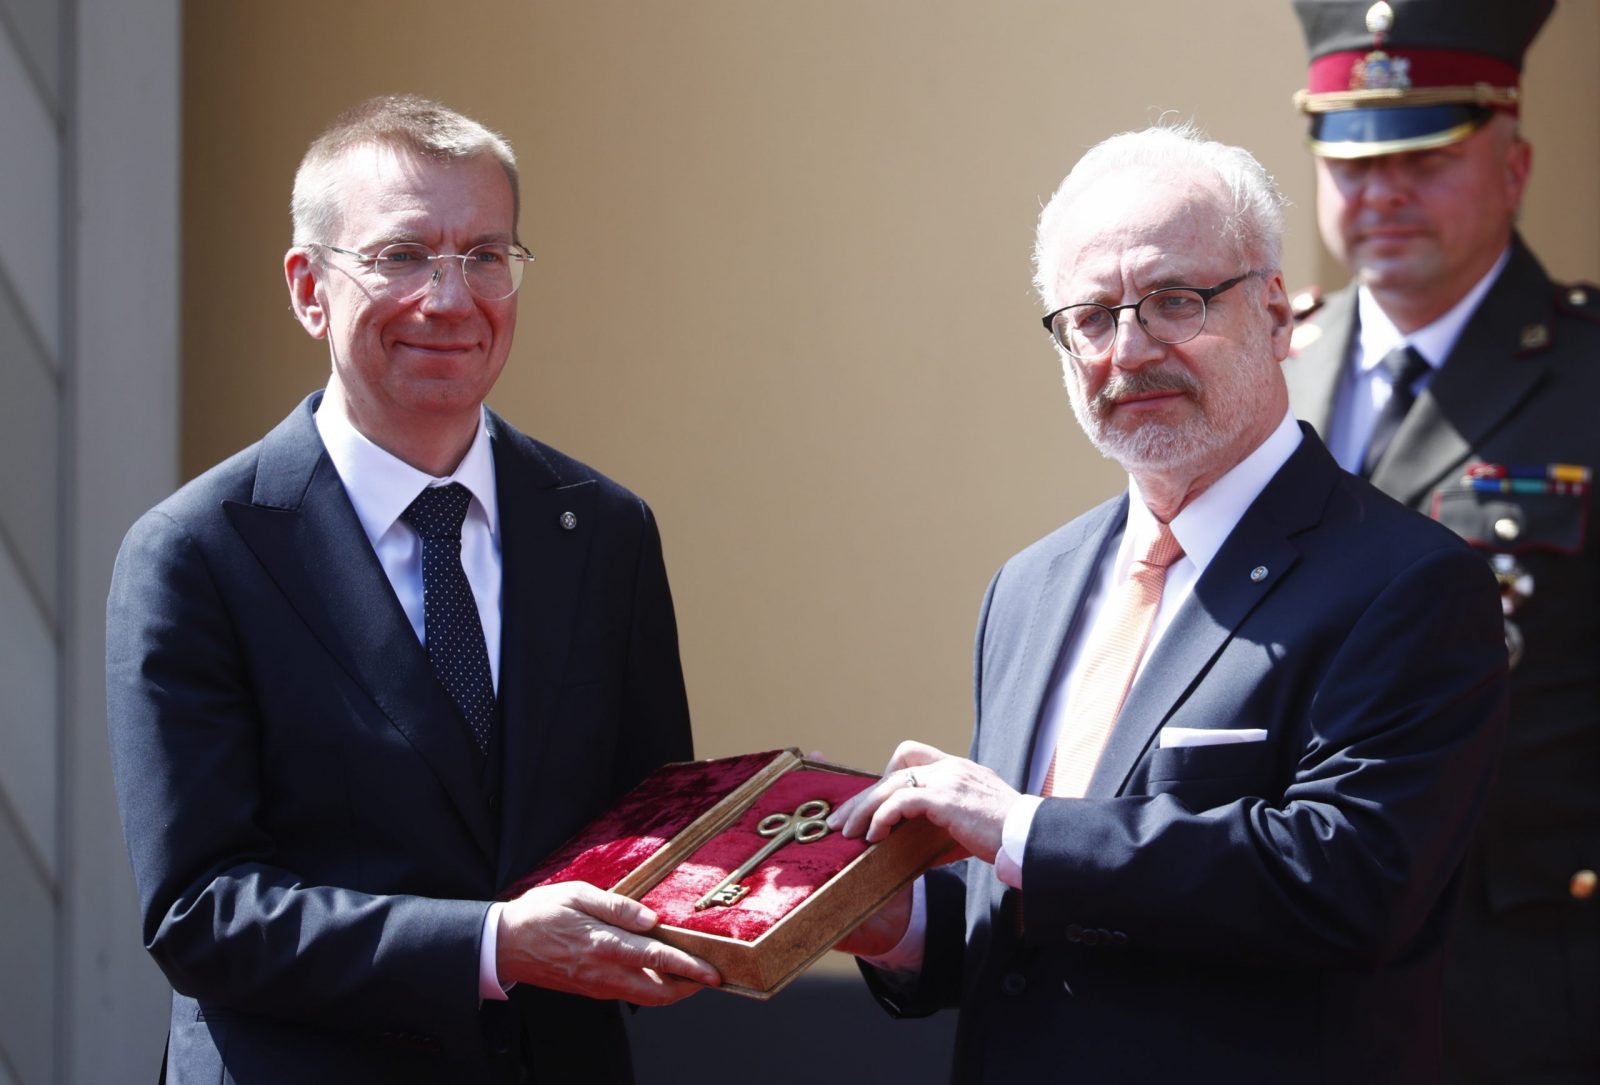 epa10733822 New Latvian President Edgars Rinkevics (L) and outgoing President Egils Levis attend the symbolic handover ceremony of the keys to Riga Castle, Latvia, 08 July 2023. Edgars Rinkevics, who was elected as the president, became the seventh president since the restoration of Latvia's independence.  EPA/TOMS KALNINS